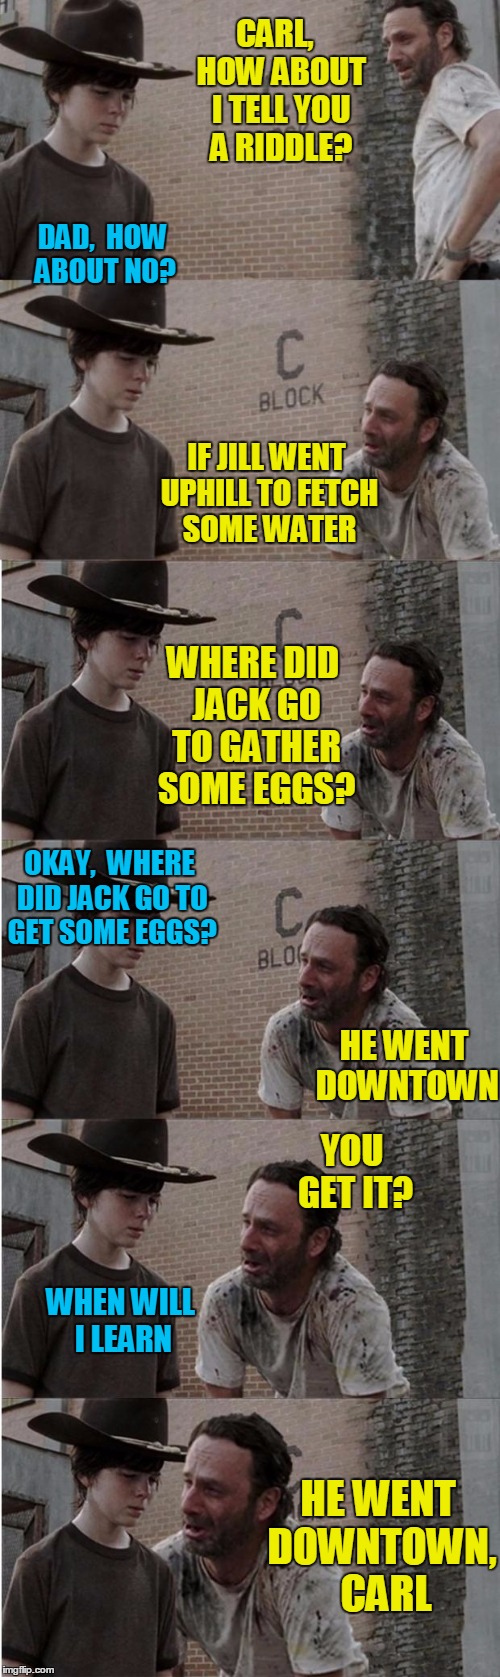 Rick and Carl Longer Meme | CARL,  HOW ABOUT I TELL YOU A RIDDLE? DAD,  HOW ABOUT NO? IF JILL WENT UPHILL TO FETCH SOME WATER; WHERE DID JACK GO TO GATHER SOME EGGS? OKAY,  WHERE DID JACK GO TO GET SOME EGGS? HE WENT DOWNTOWN; YOU GET IT? WHEN WILL I LEARN; HE WENT DOWNTOWN,  CARL | image tagged in memes,rick and carl longer | made w/ Imgflip meme maker